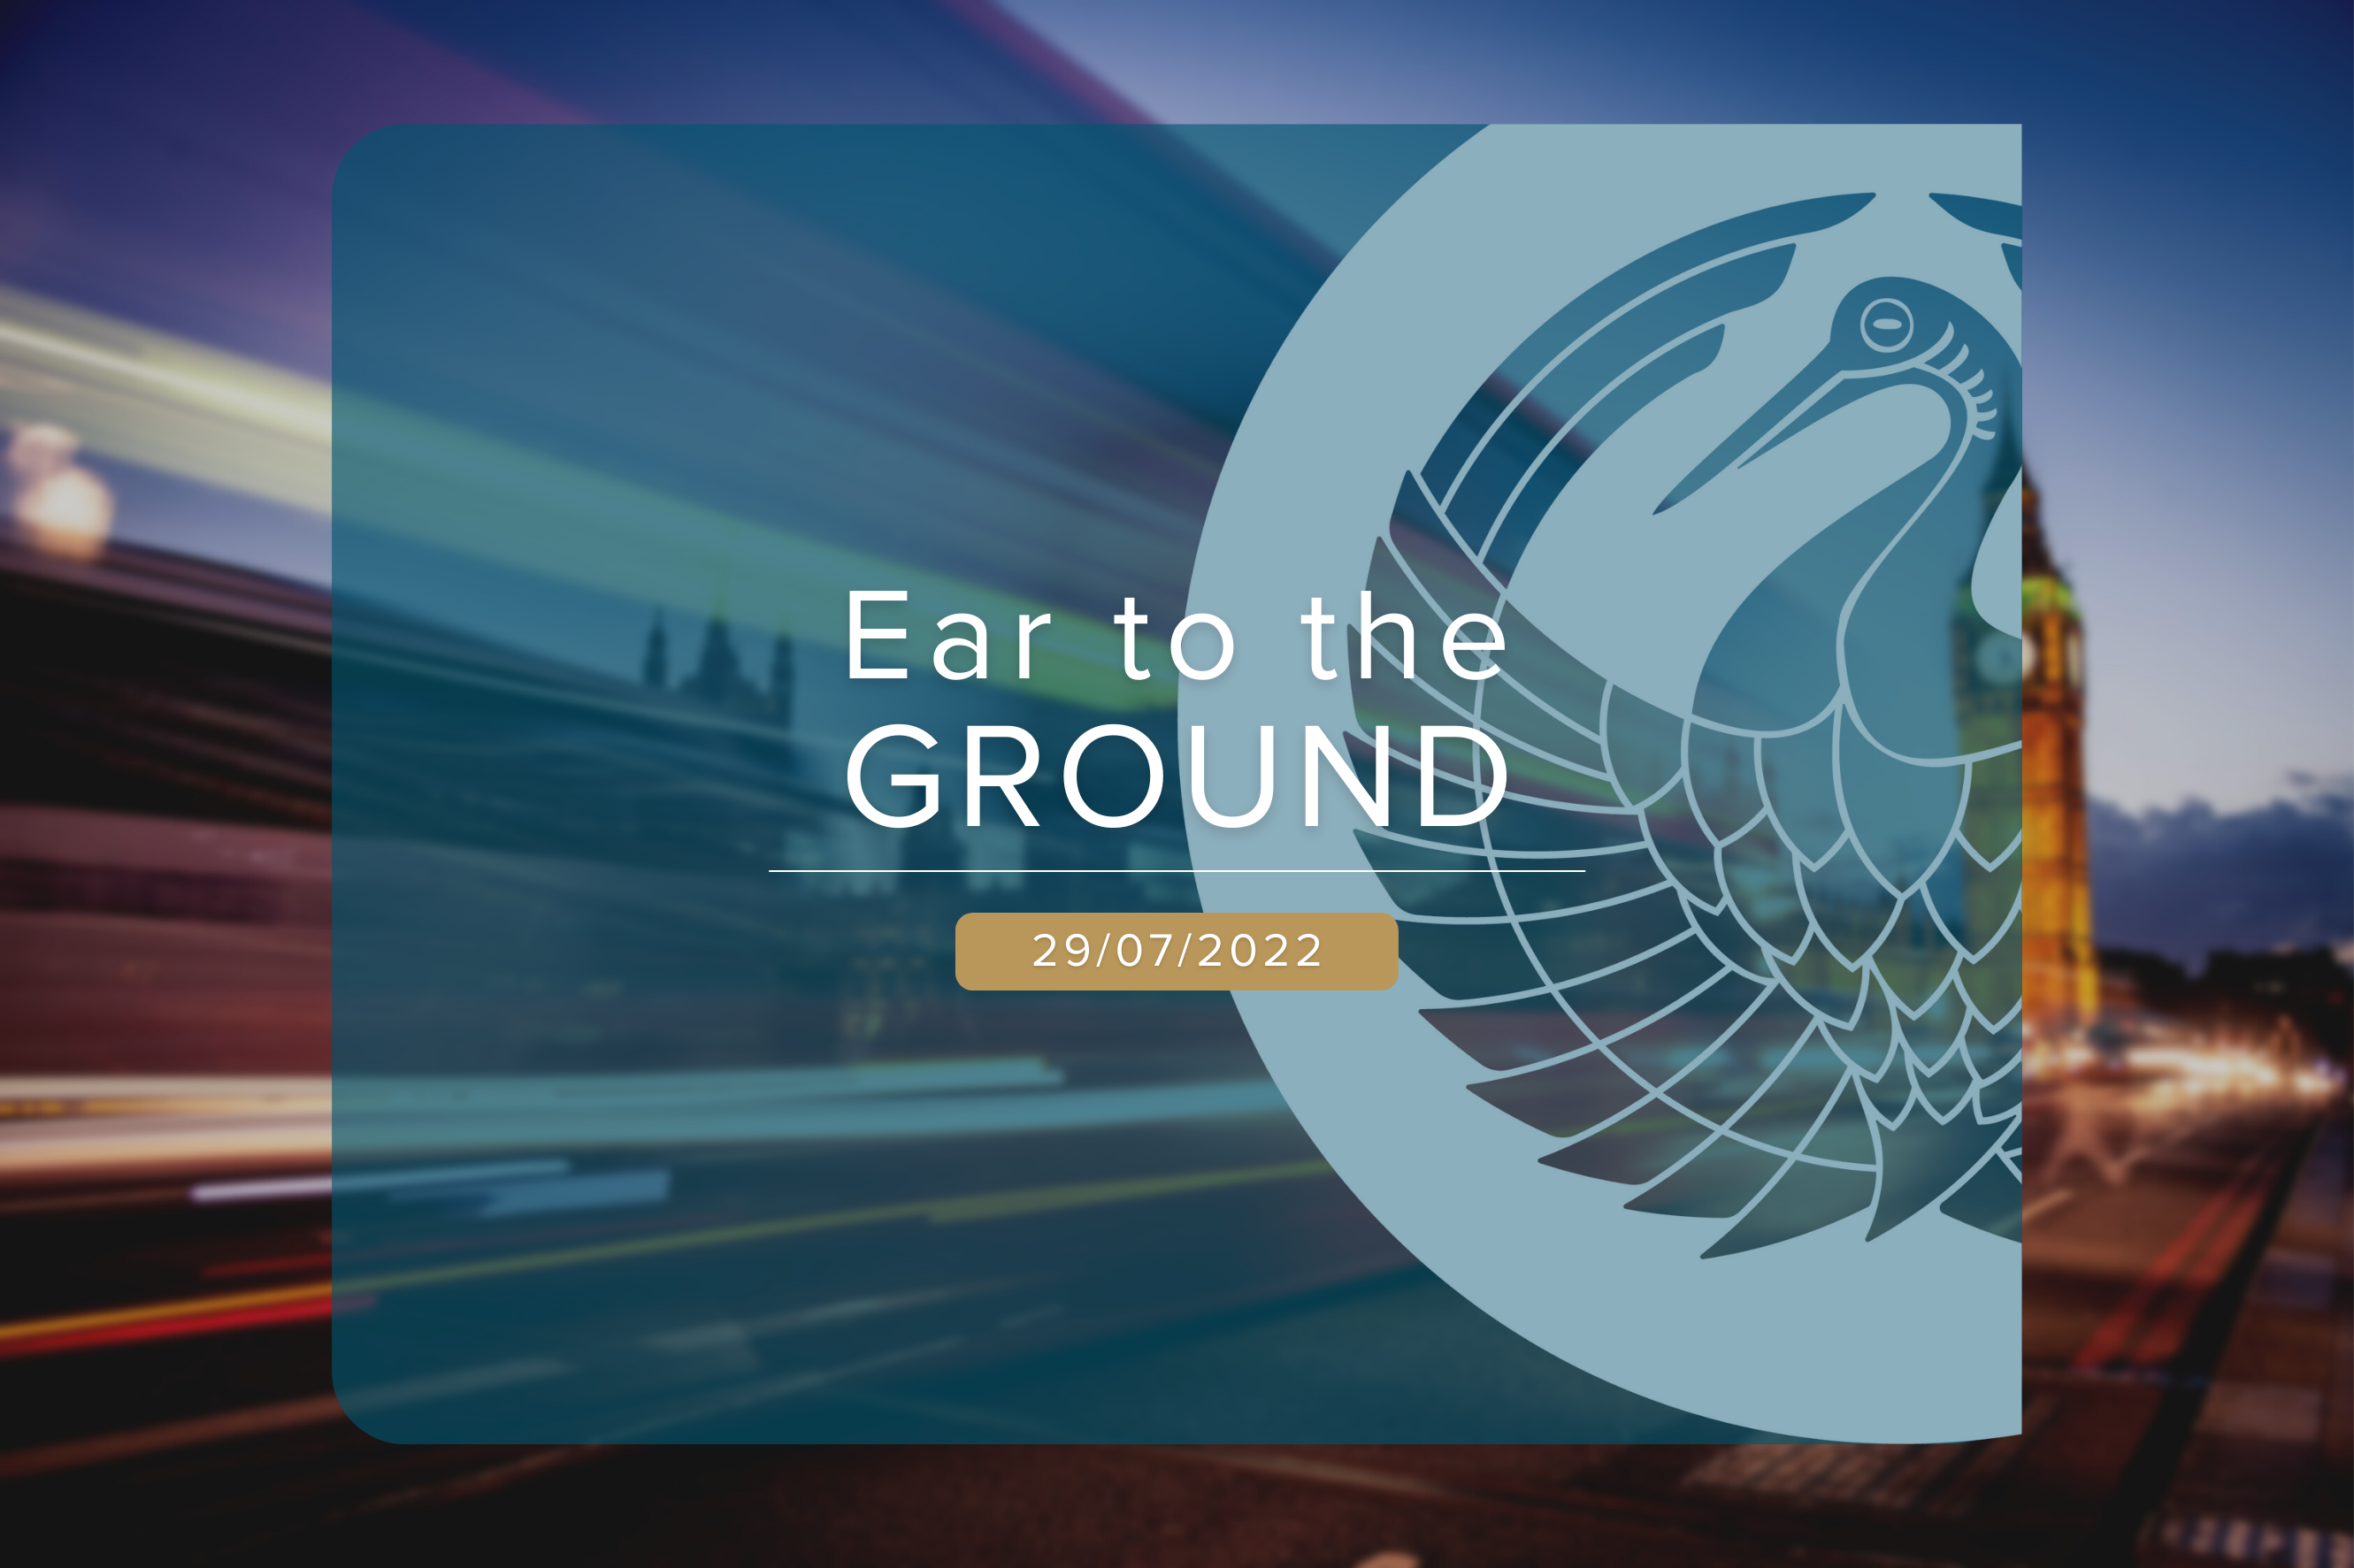 Ear to the ground 29/07/22